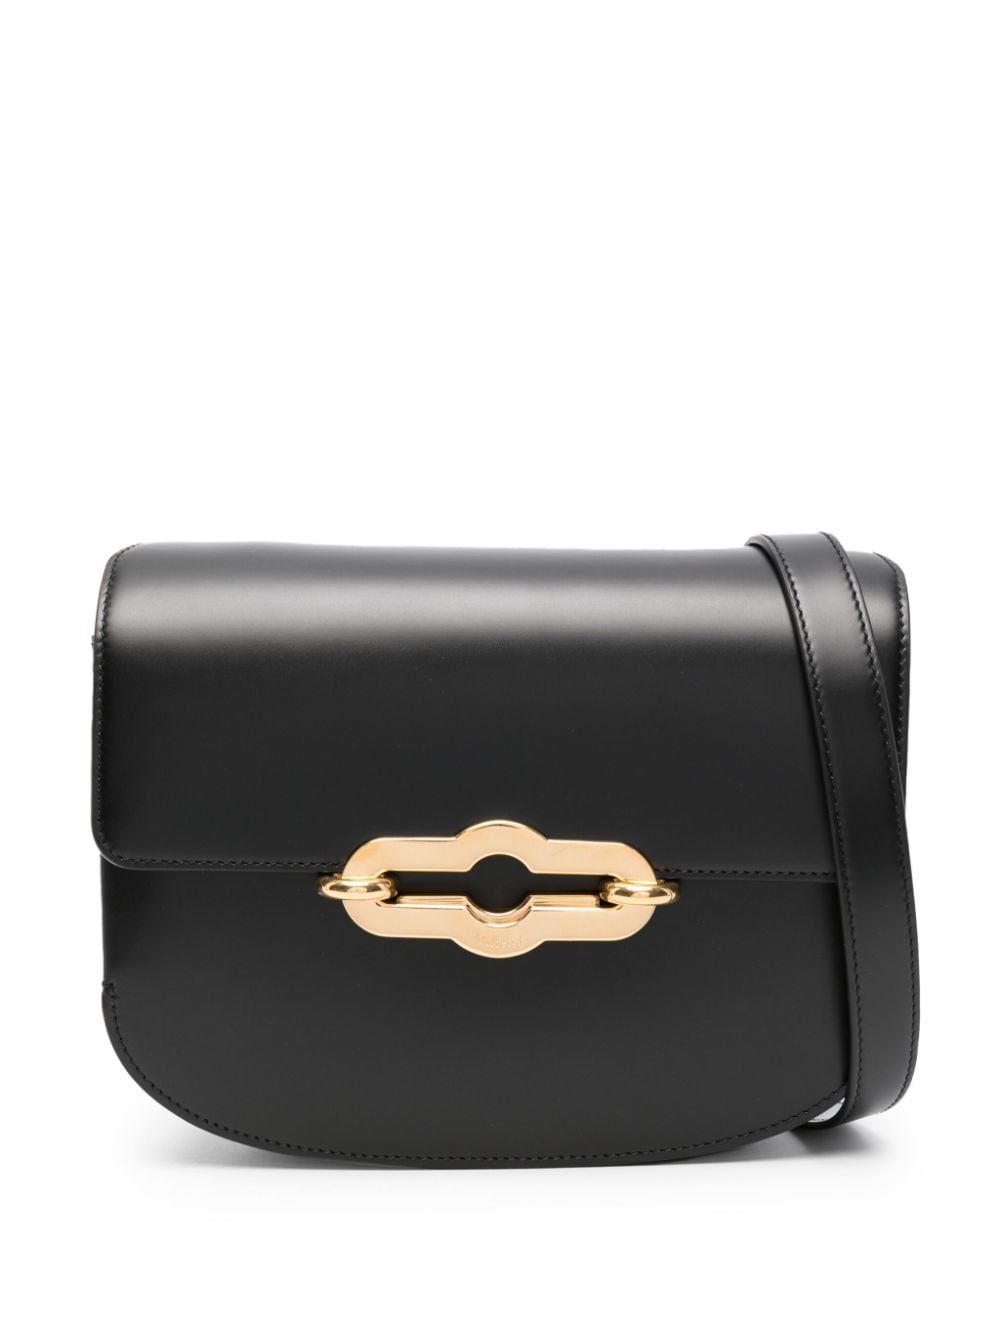 Shop Mulberry Pimlico Leather Satchel Bag In Black